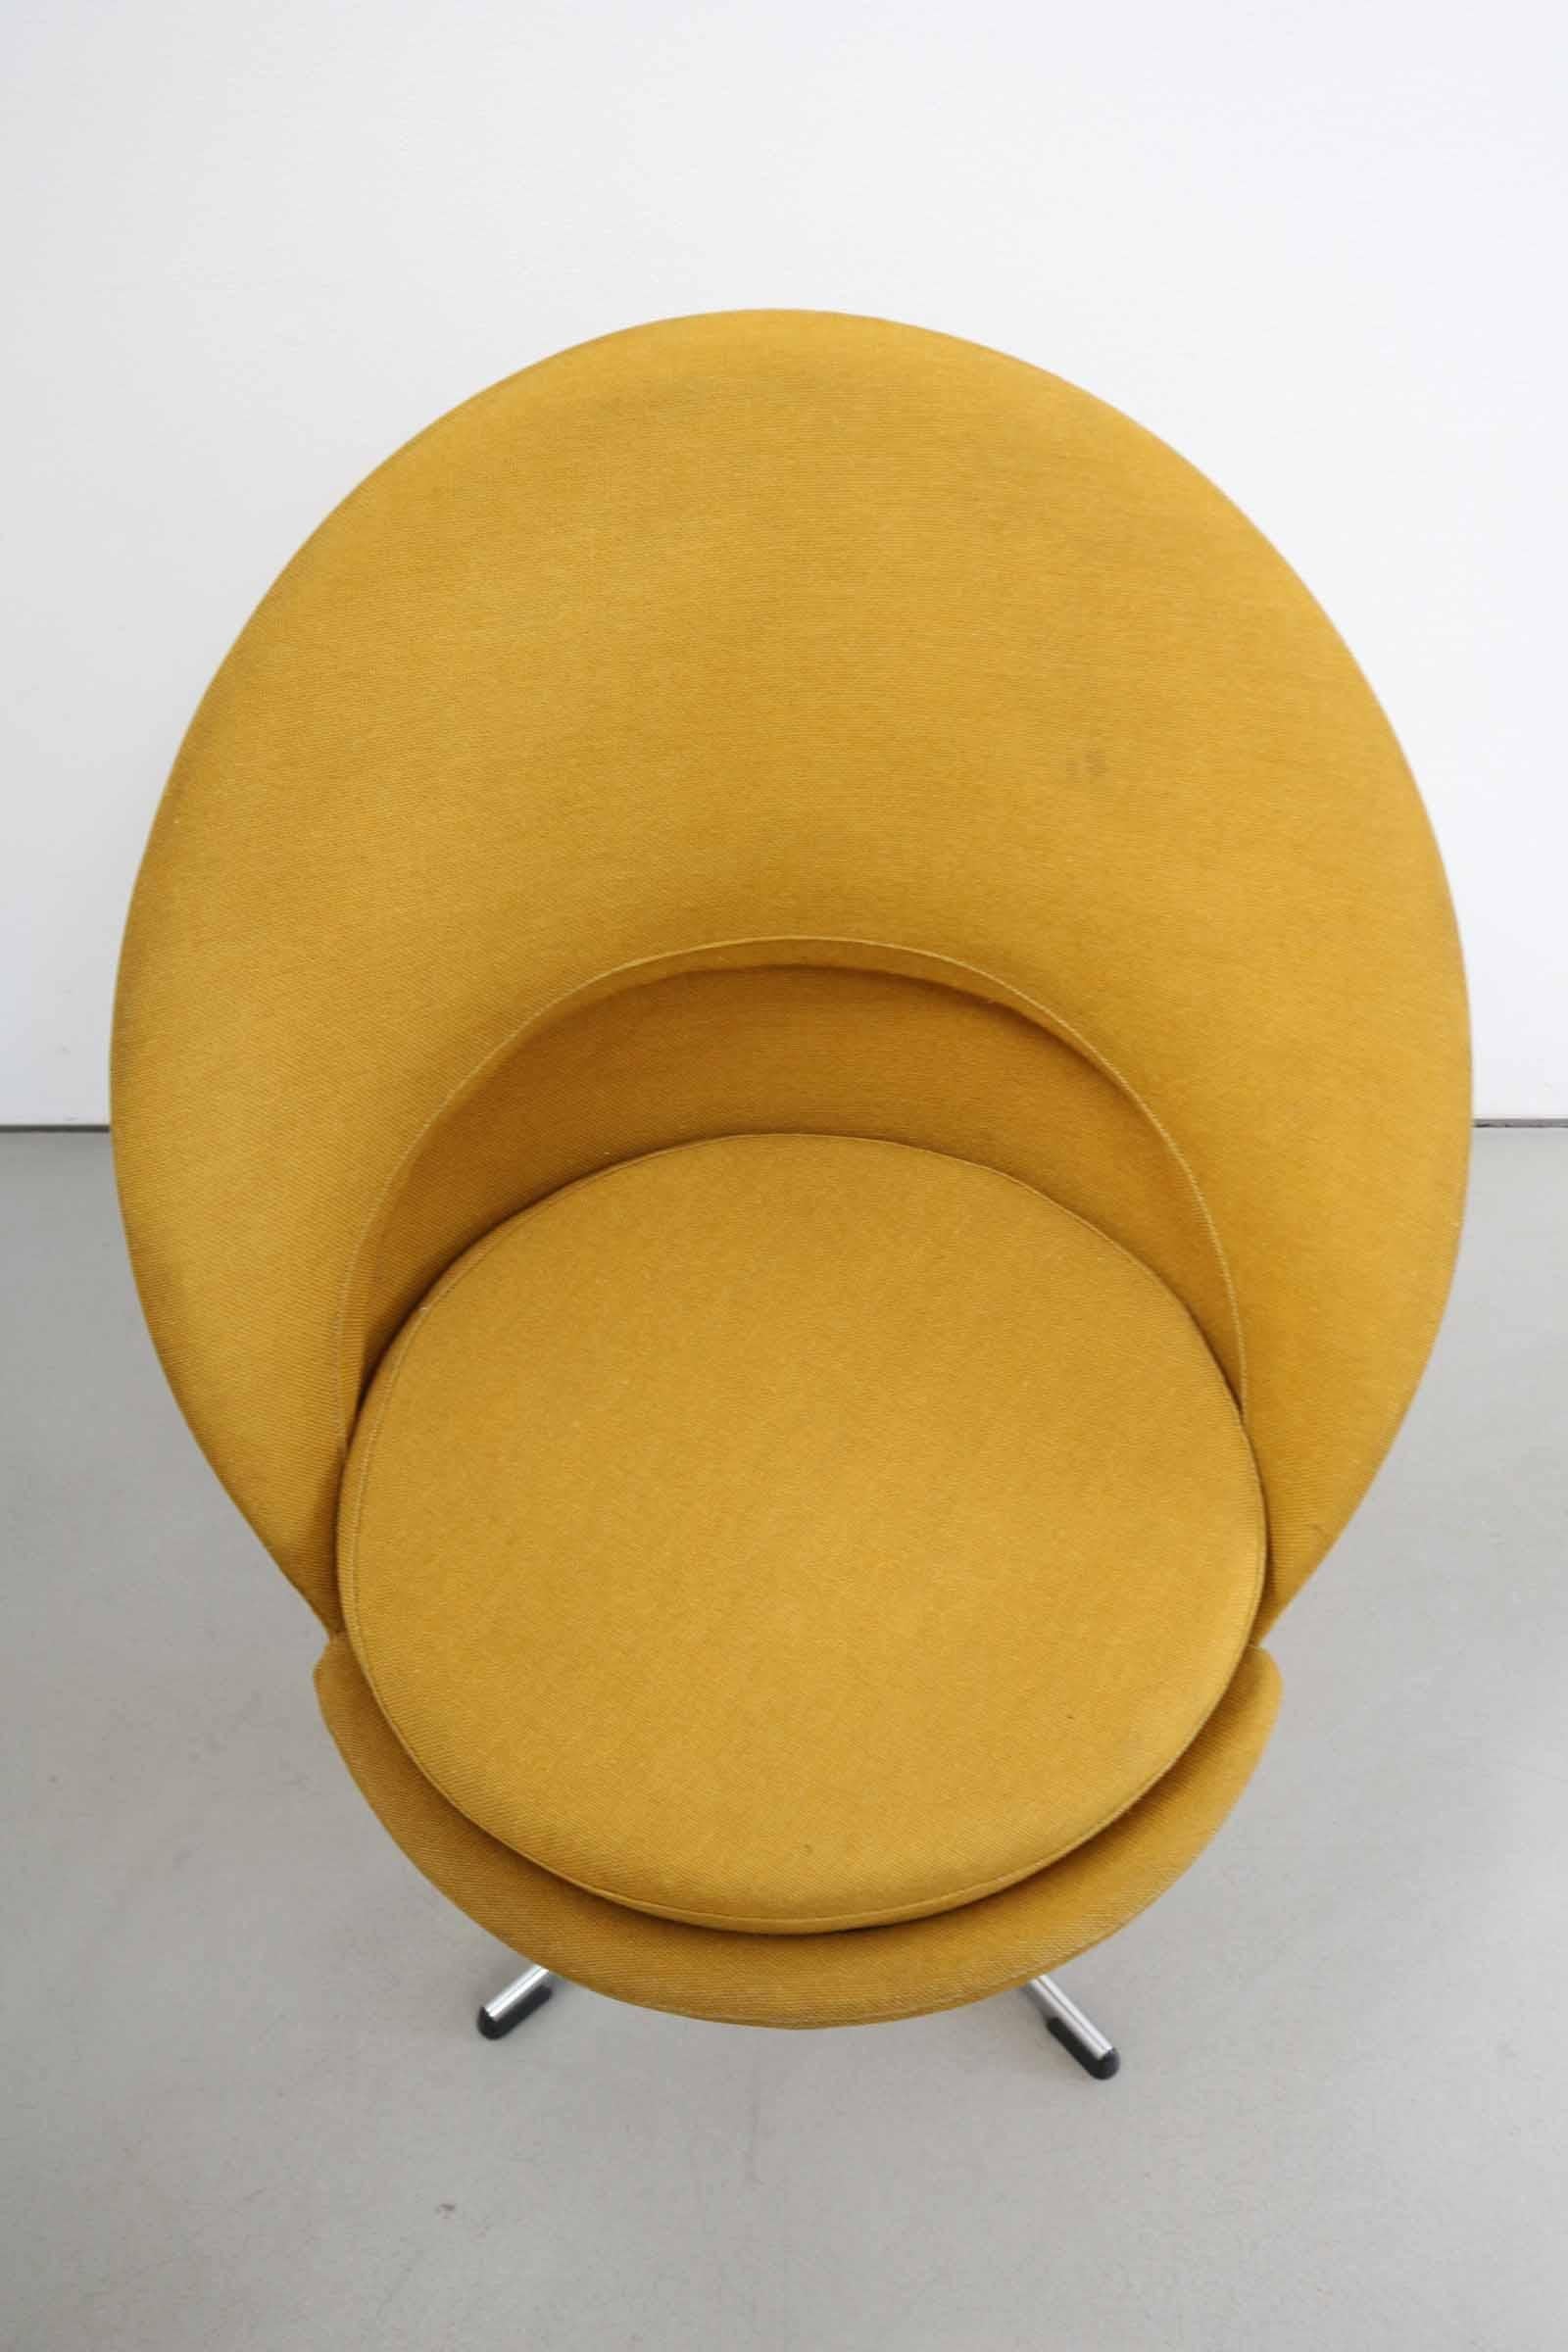 Mid-20th Century Verner Panton Mustard Yellow Cone Chair in Original Fabric, Denmark, 1960s For Sale